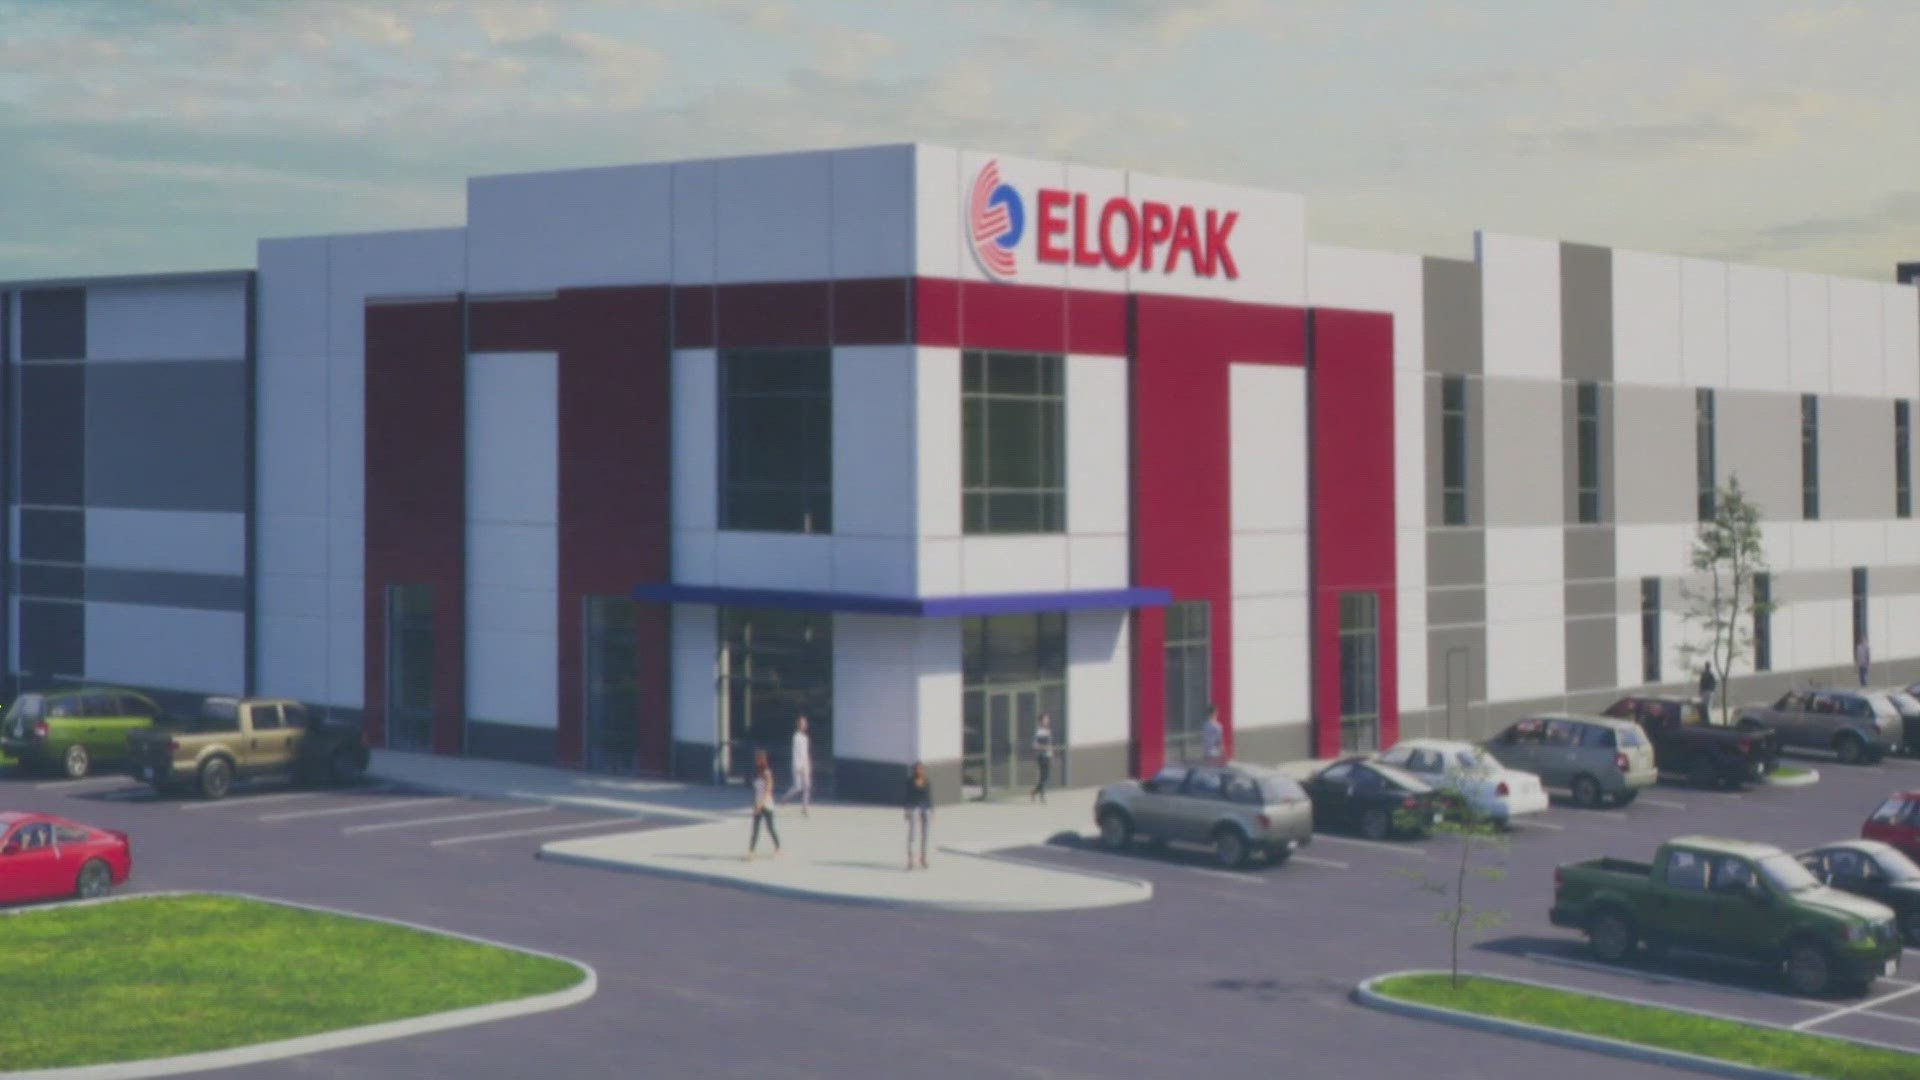 Elopak, a Norway packaging company, promises more than 100 new jobs to create and manufacture its signature cartons designed to ship things like milk cartons.